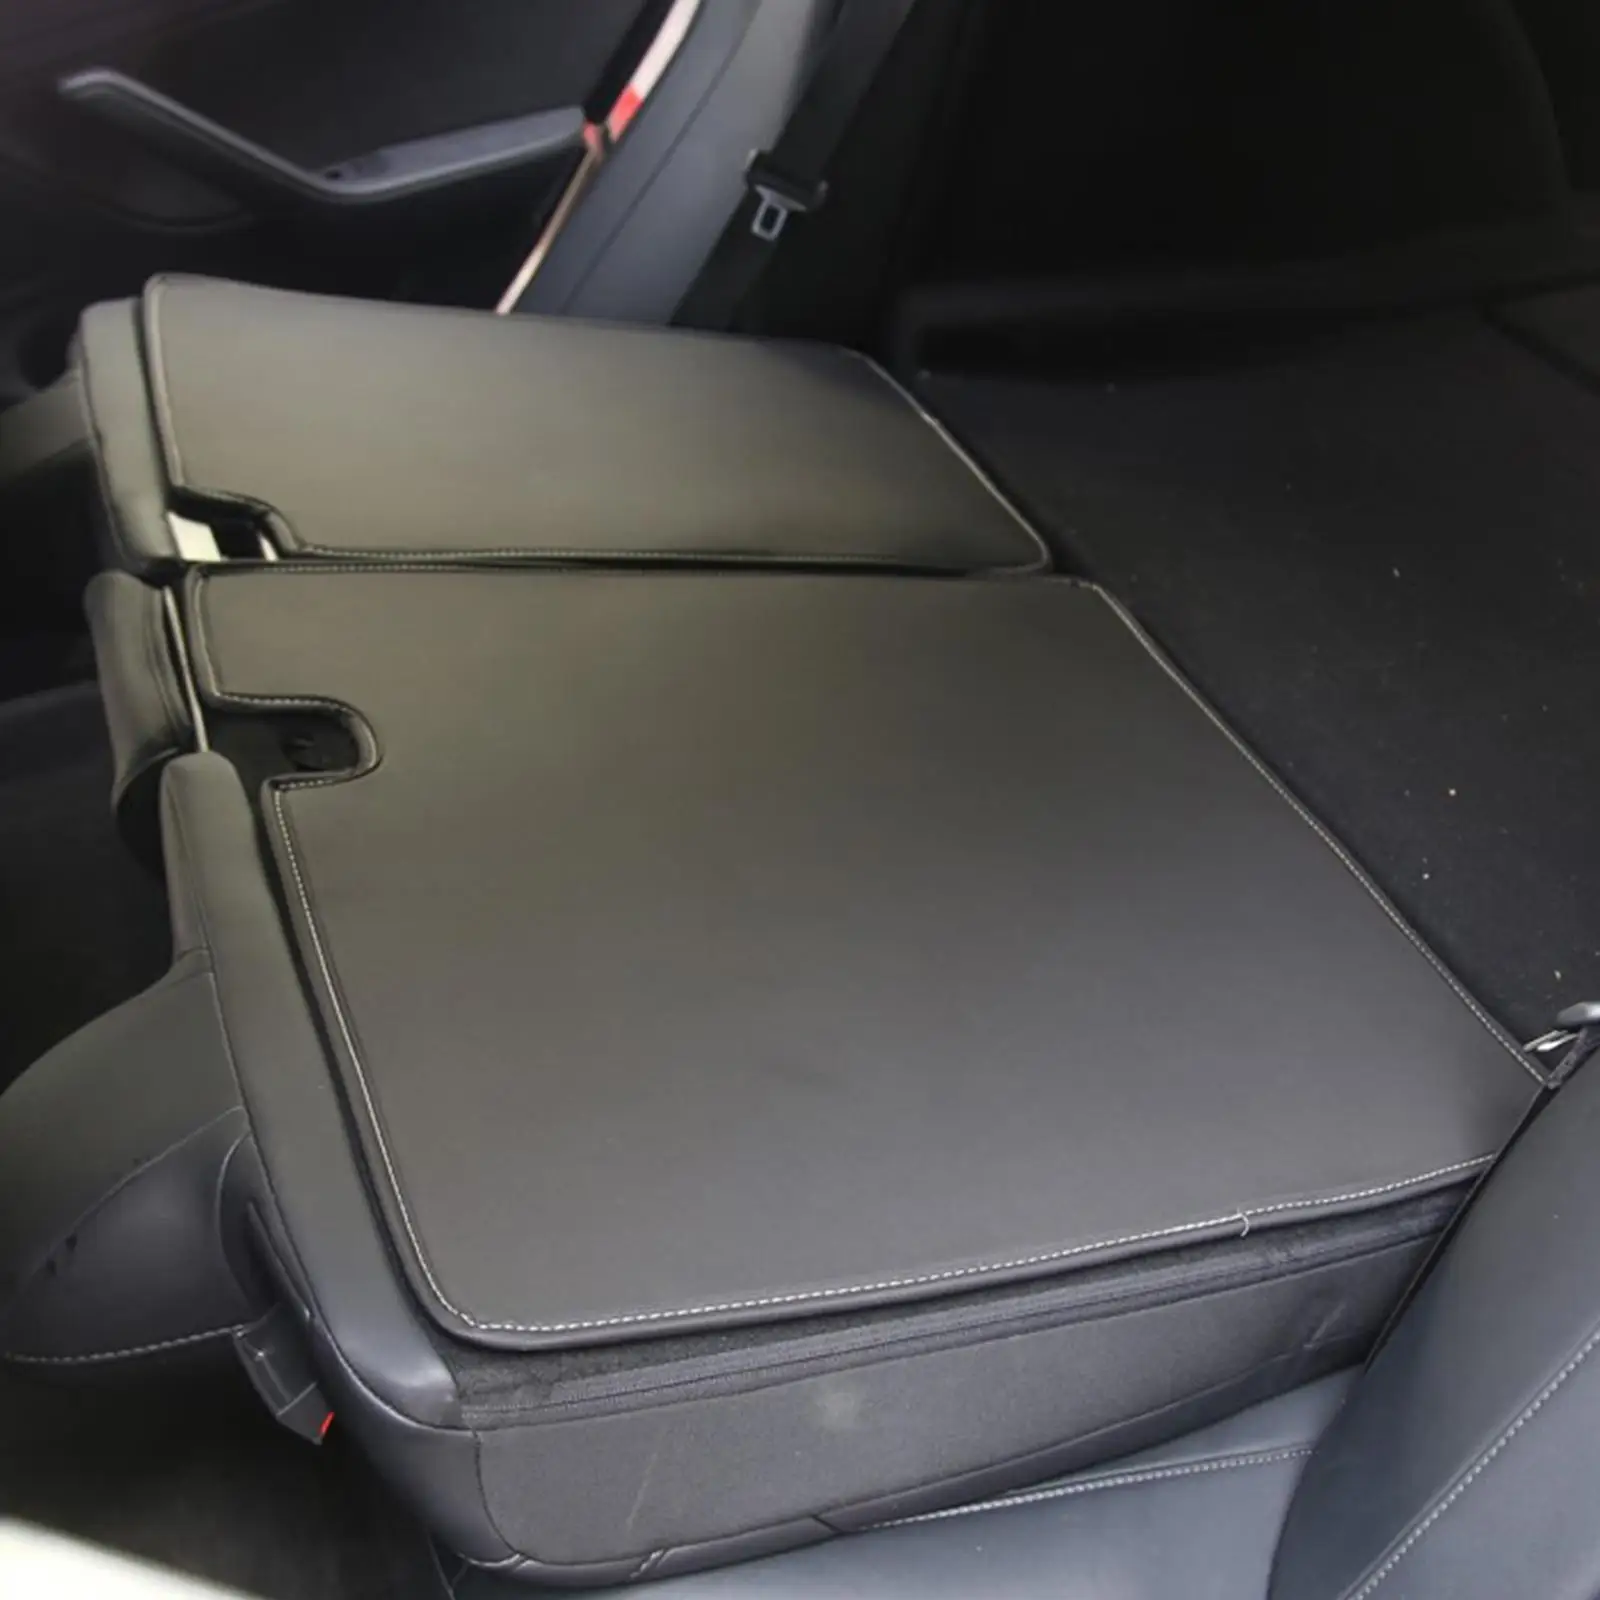 2x Car Rear Seat Pad Trunk Back Backrest Protective Cushions for Tesla Model 3 Model Y Seats Back Cover Clean Mat Pad Black